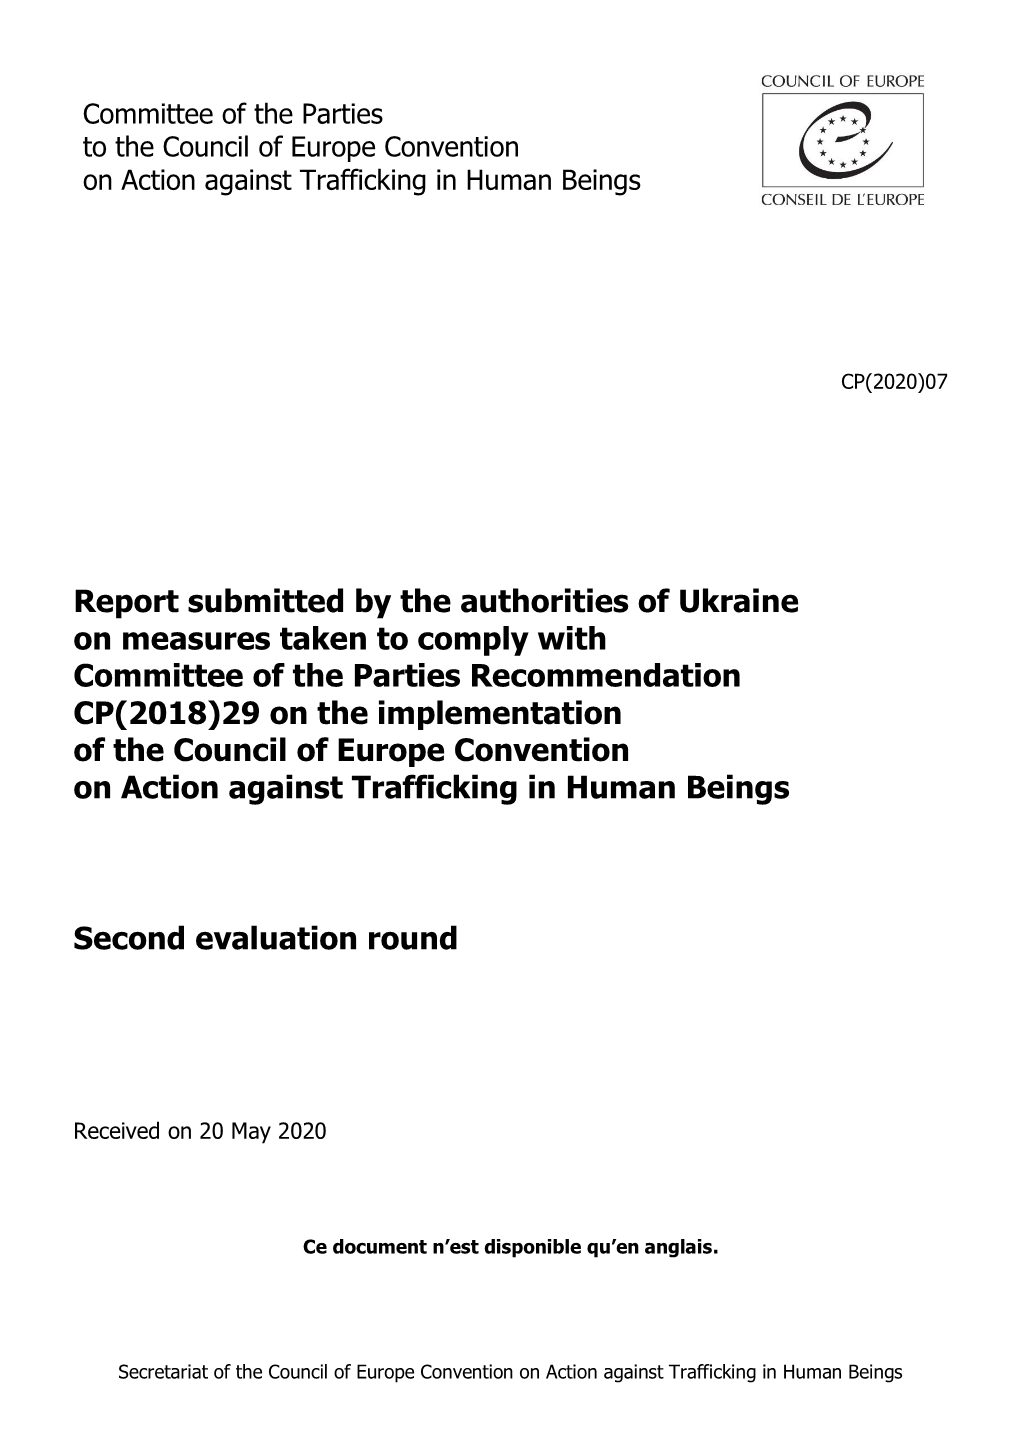 Report Submitted by the Authorities of Ukraine on Measures Taken To